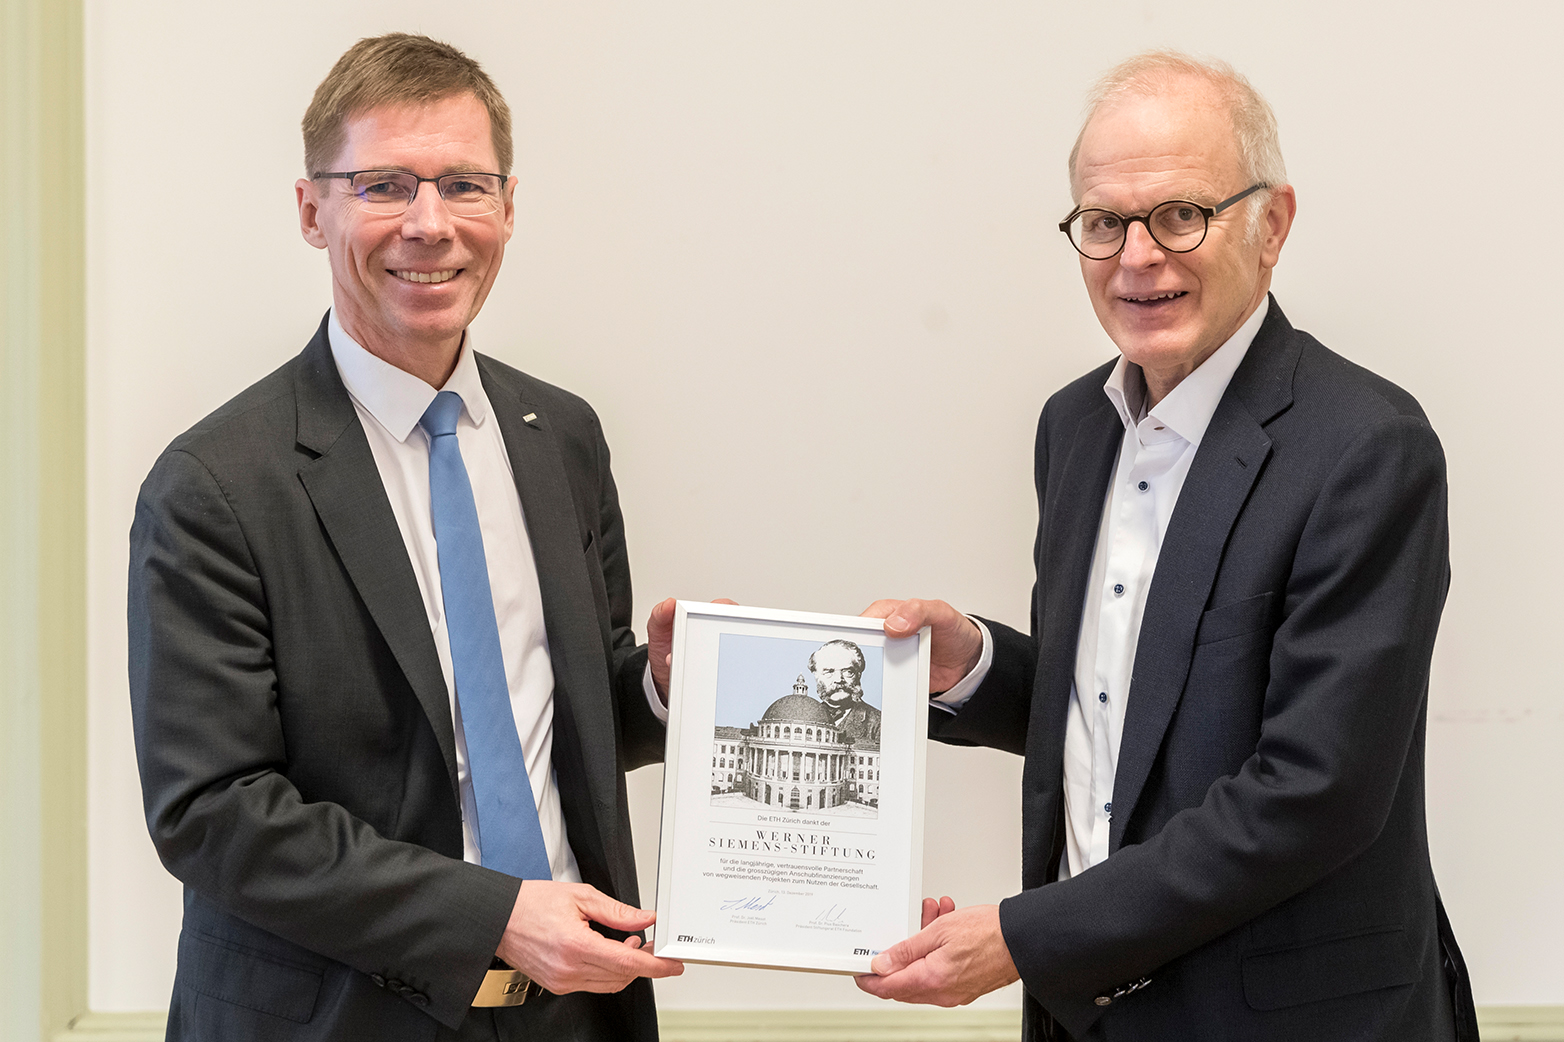 ETH President Joël Mesot thanks Hubert Keiber, Chairman of the Board of Trustees of the Werner Siemens Foundation, for his many years of partnership. (Photograph:&nbsp; Alessandro Della Bella / ETH Zurich)